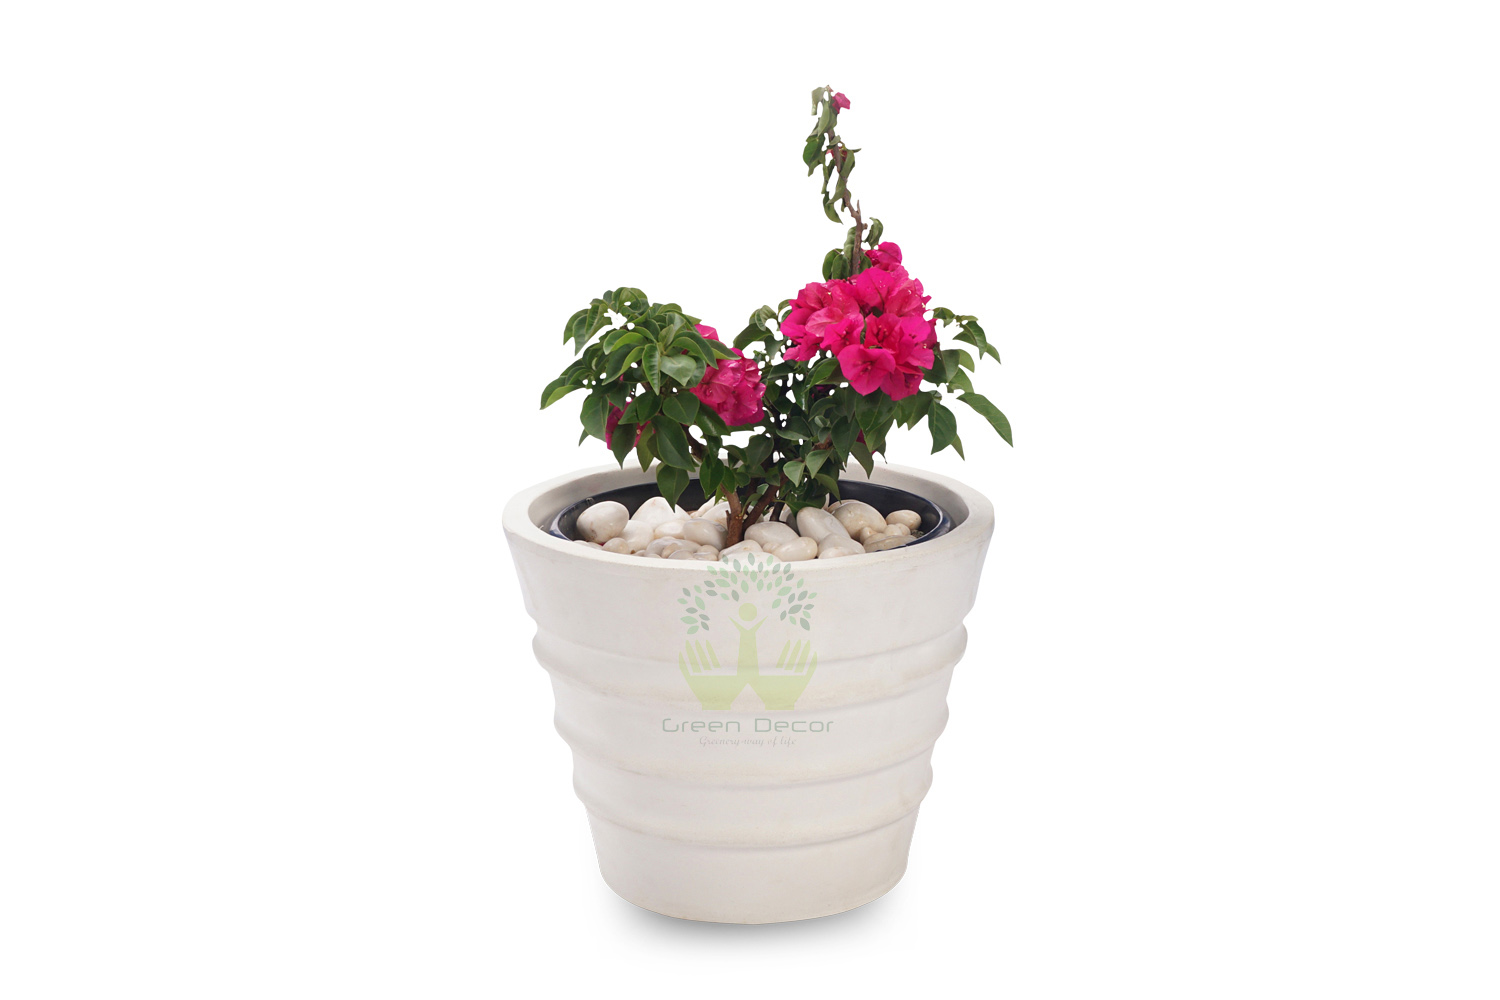 Buy Bougainvillea Plants , White Pots and seeds in Delhi NCR by the best online nursery shop Greendecor.